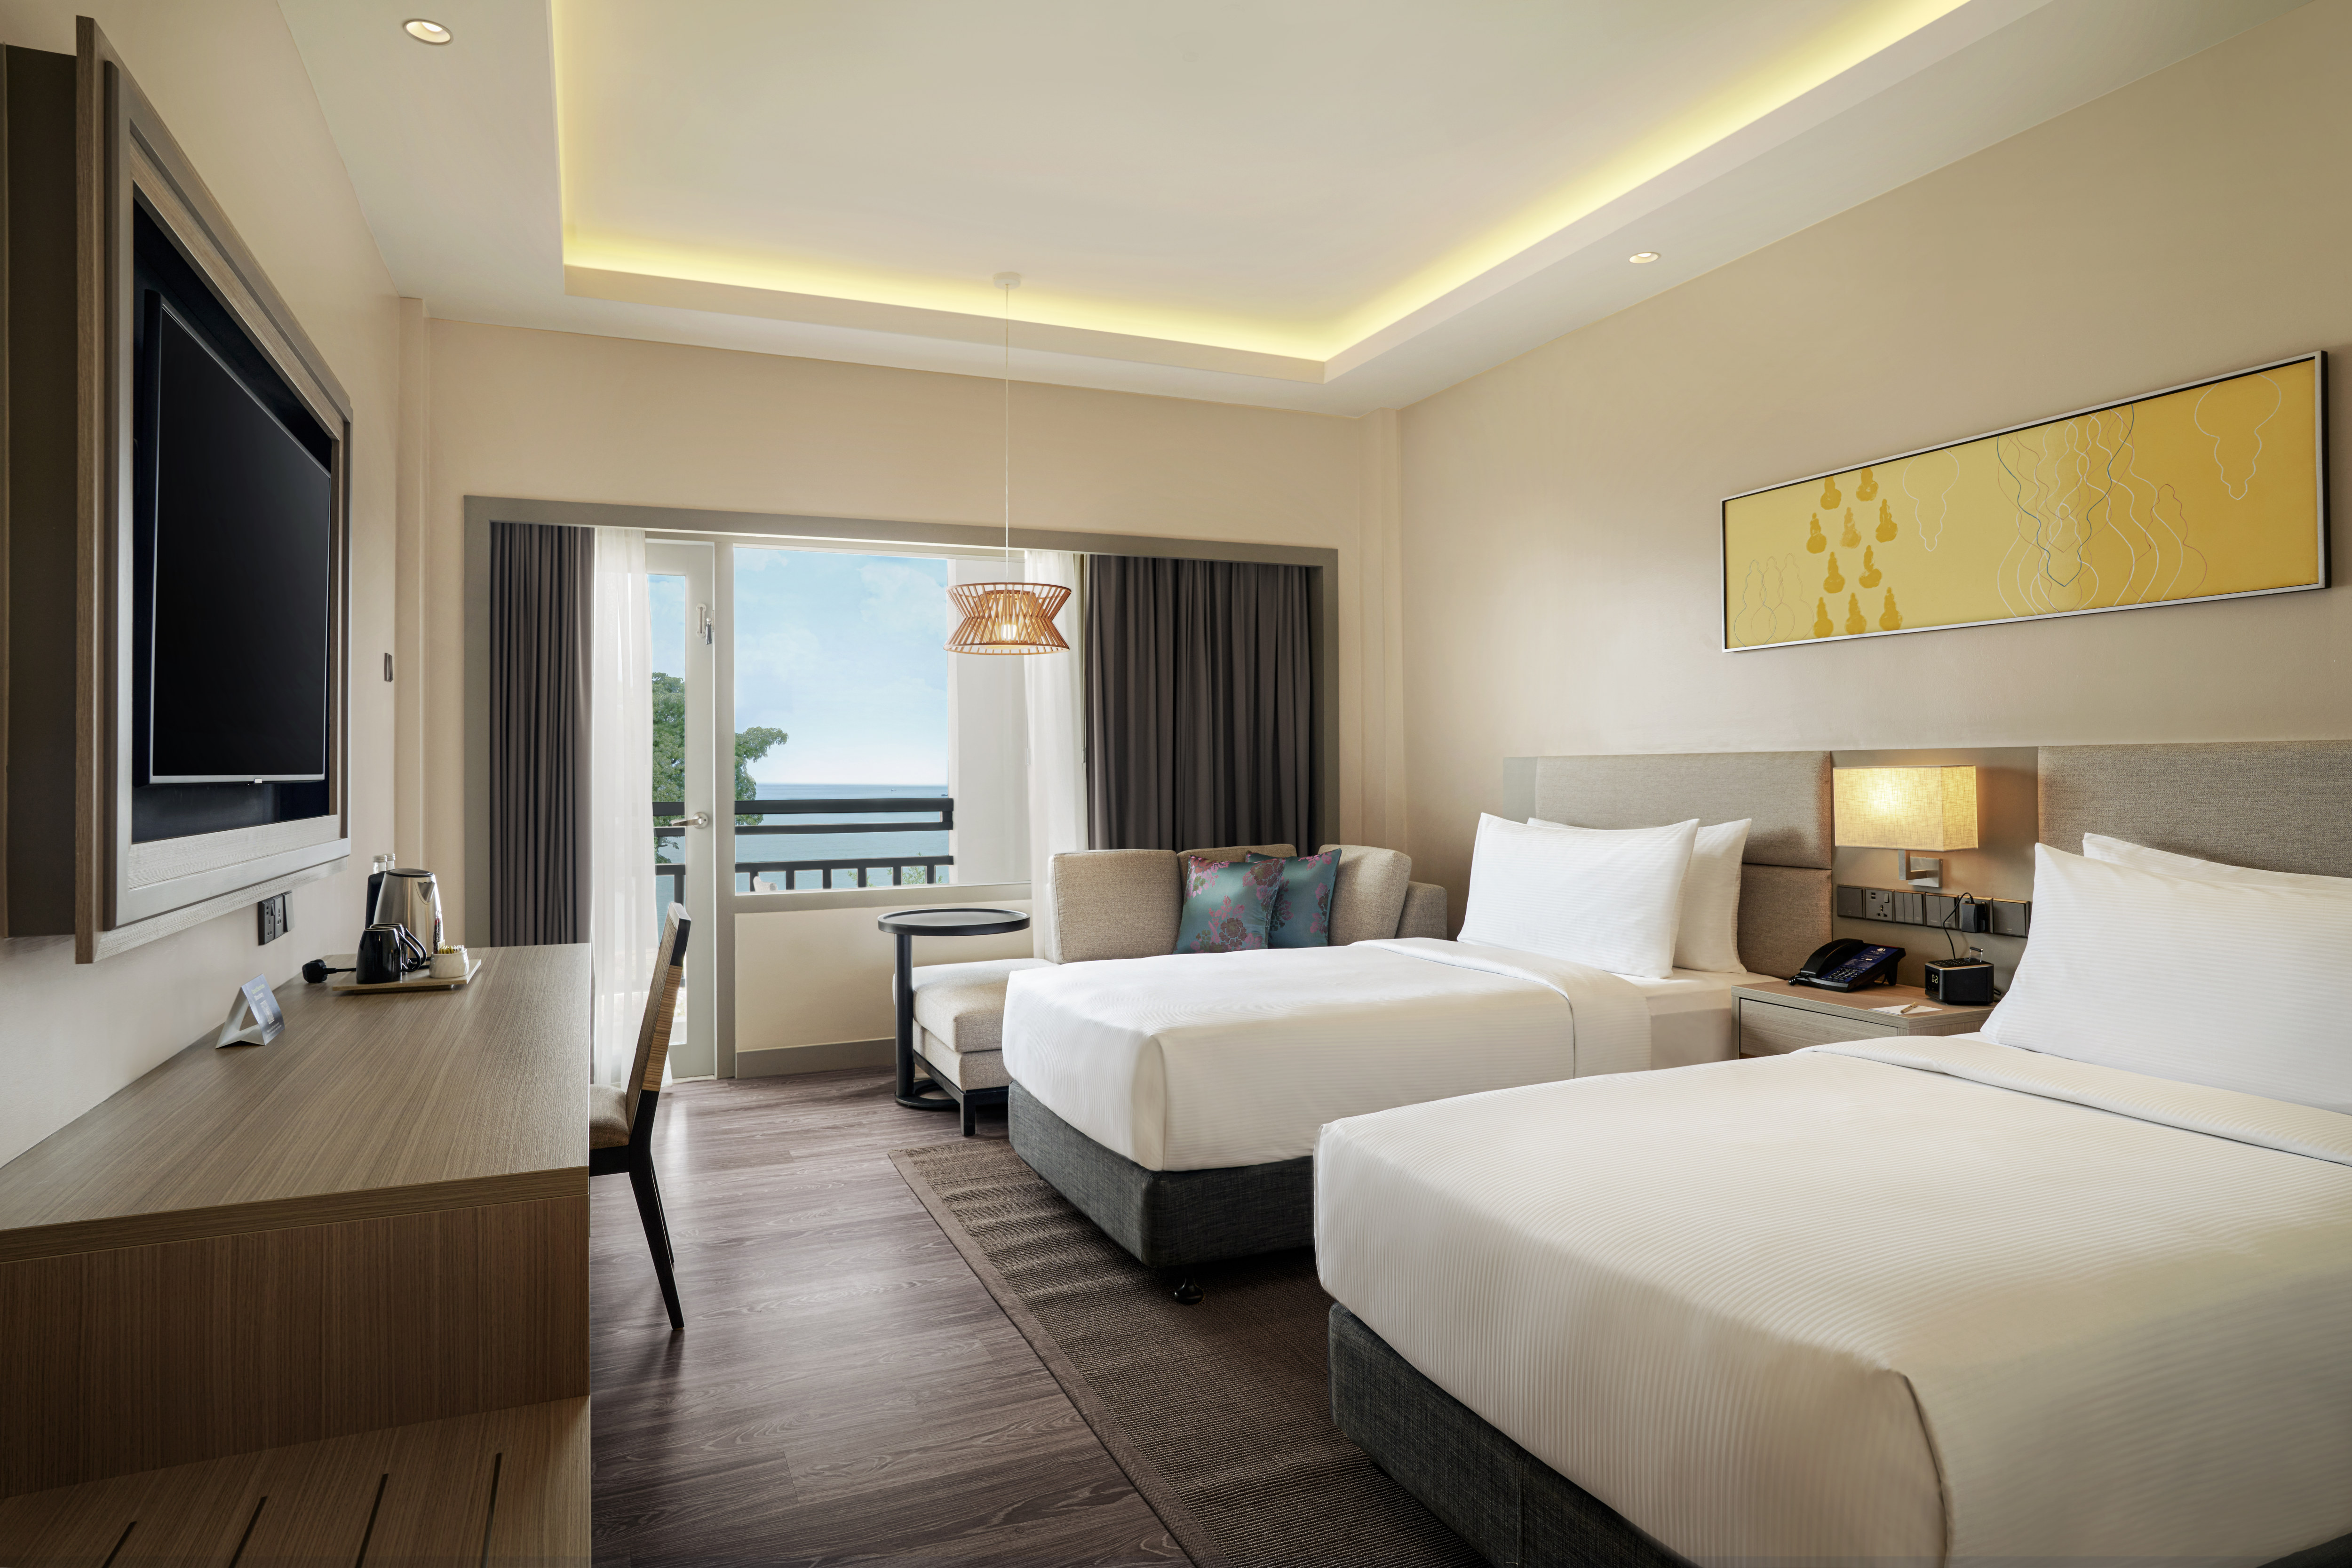 Executive twin beds room with sea view, wall mounted TV and sofa